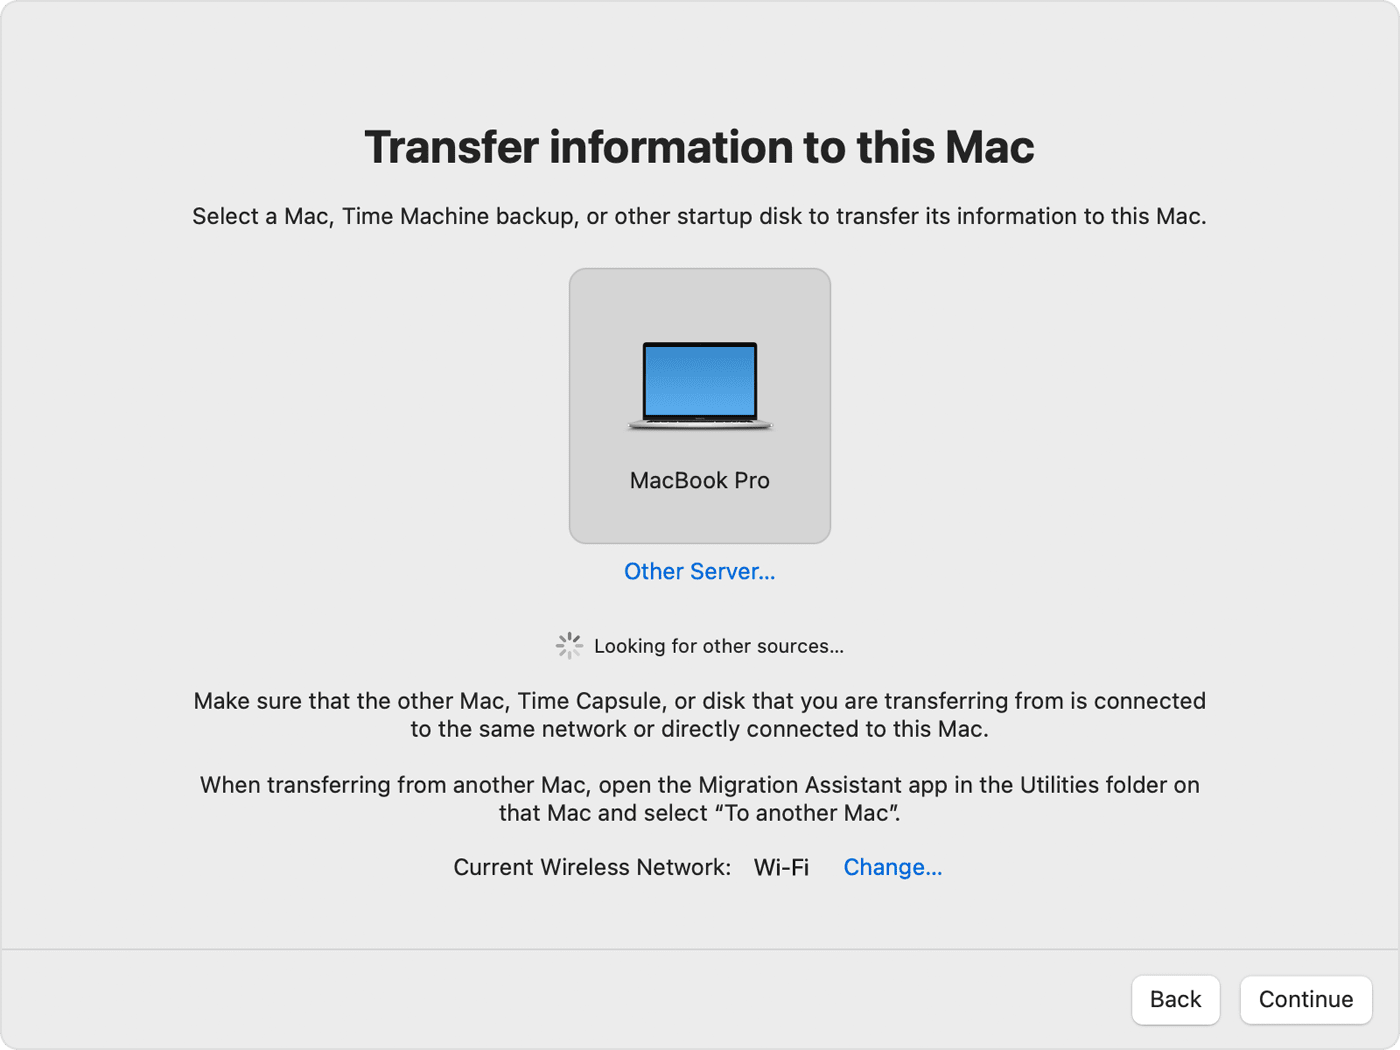 Migration Assistant: Select a transfer source